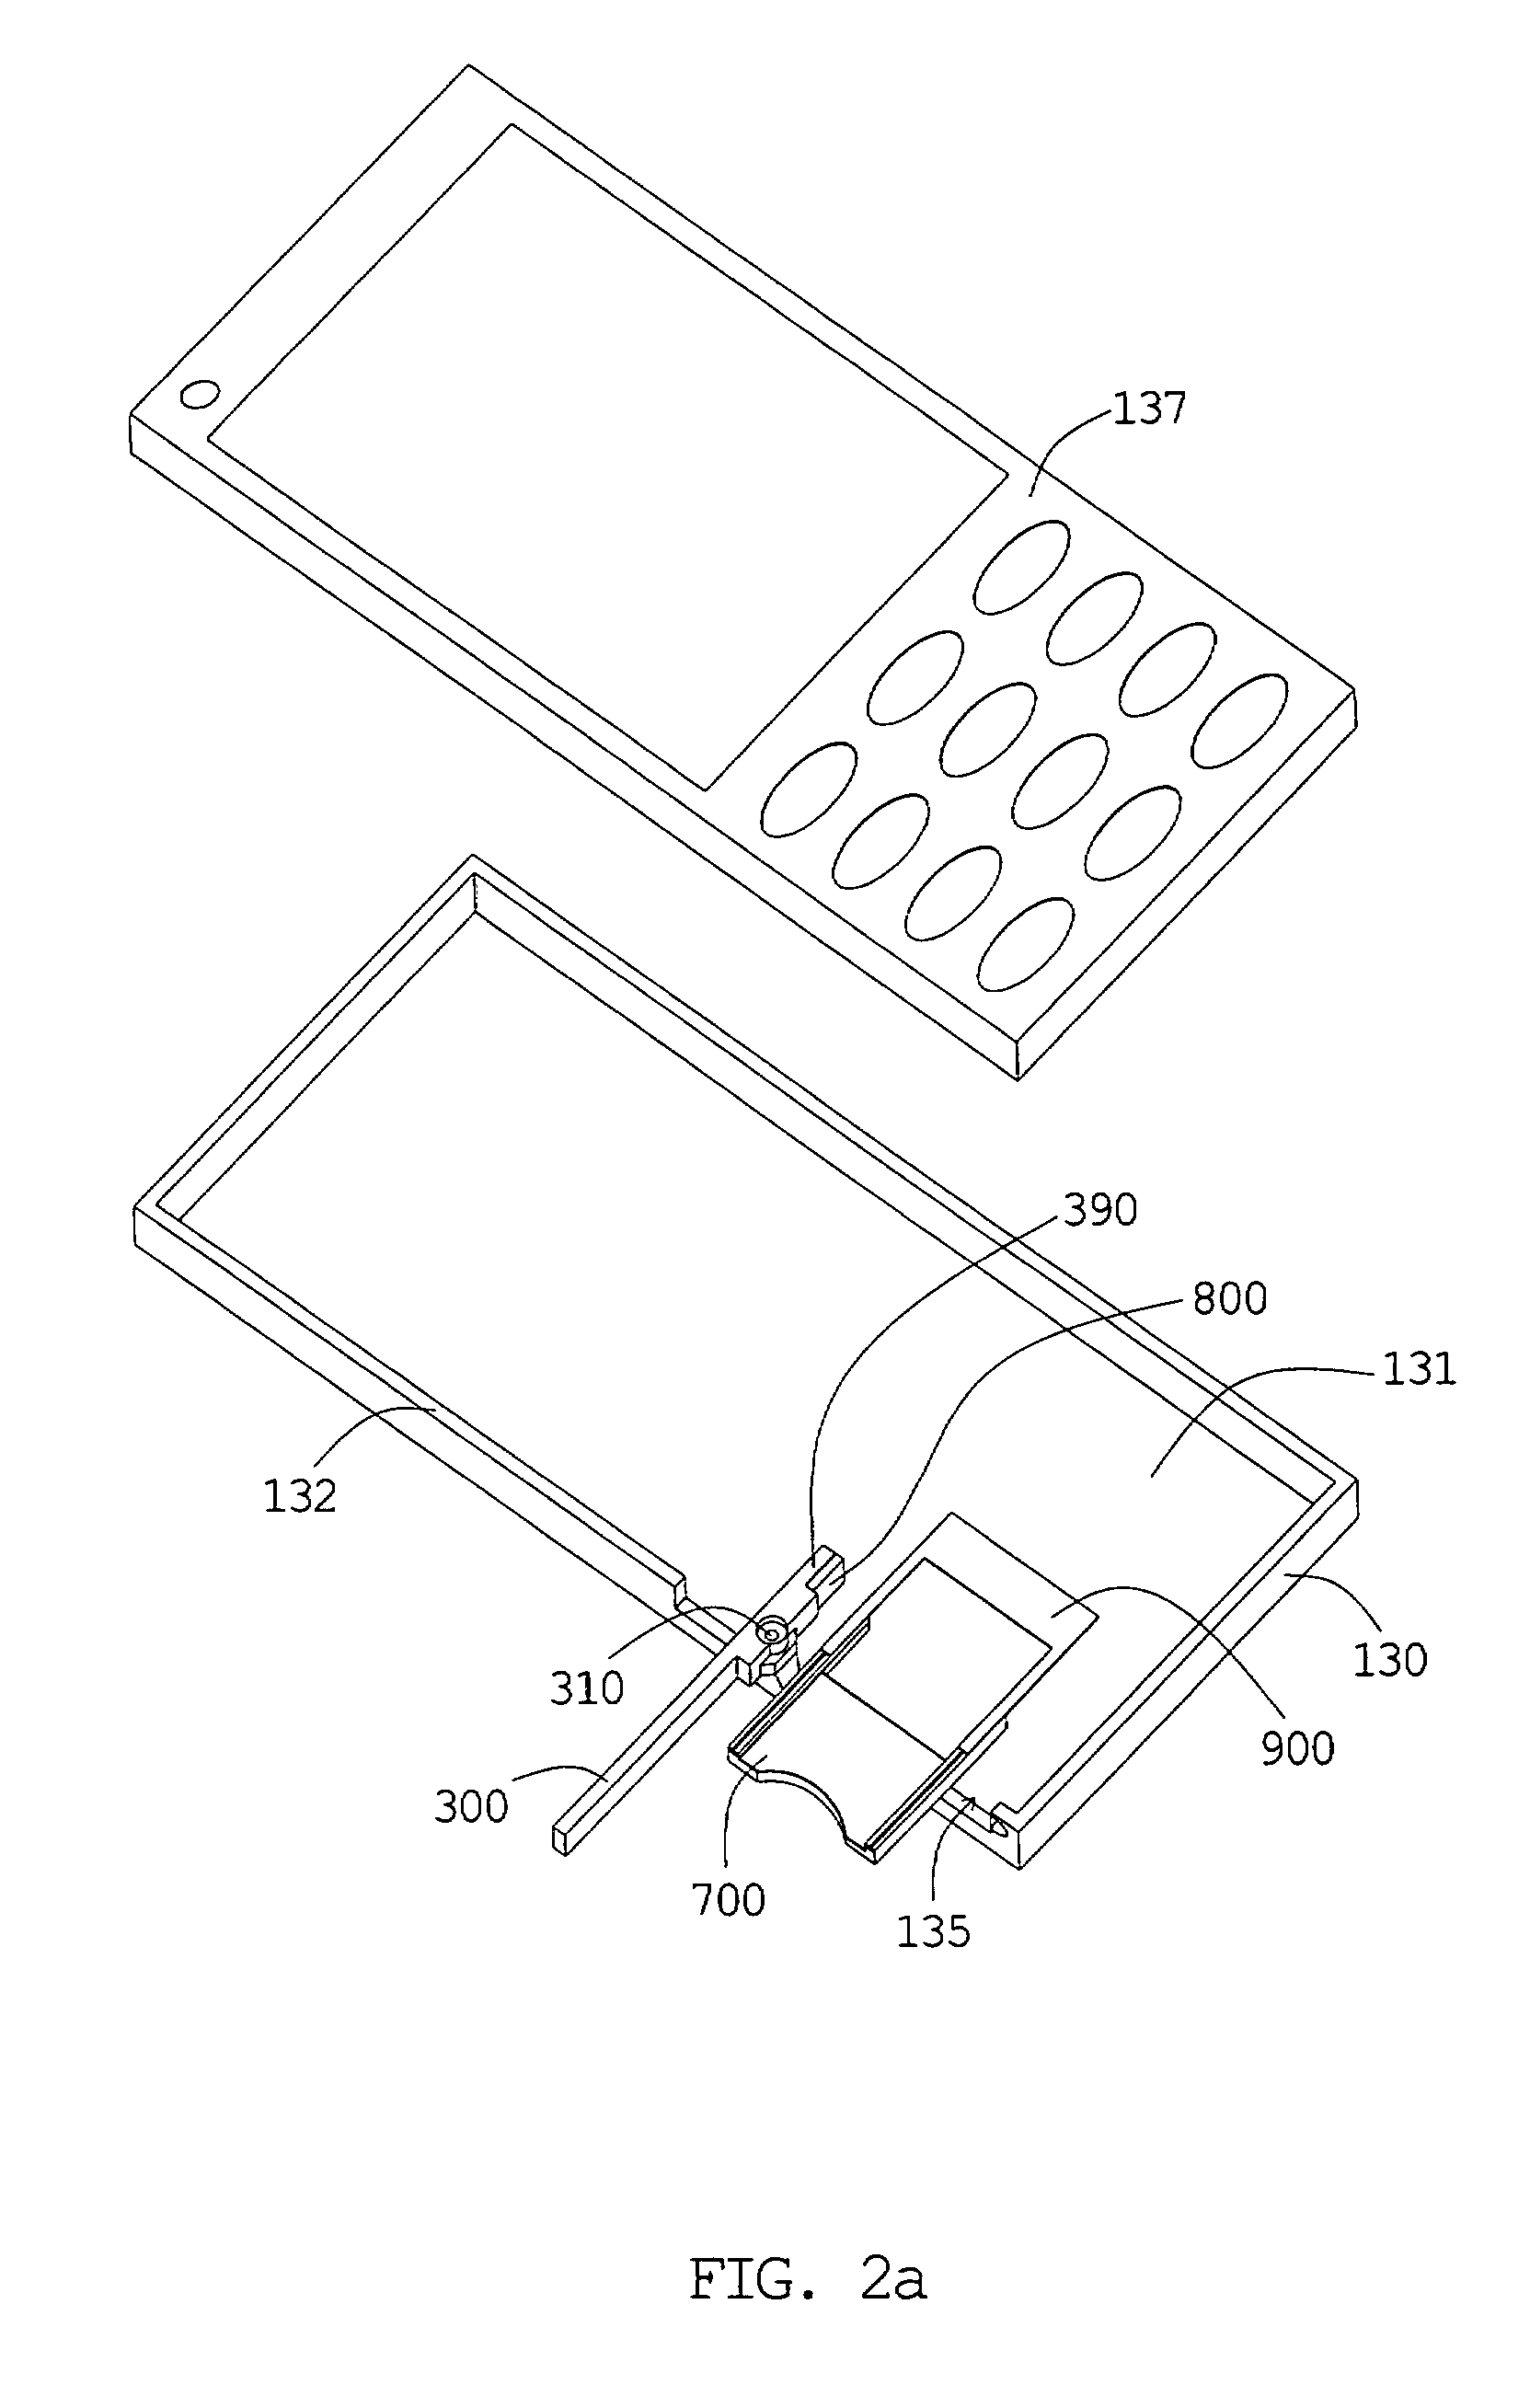 Electronic device and an ejection device for ejecting a separable device from the electronic device